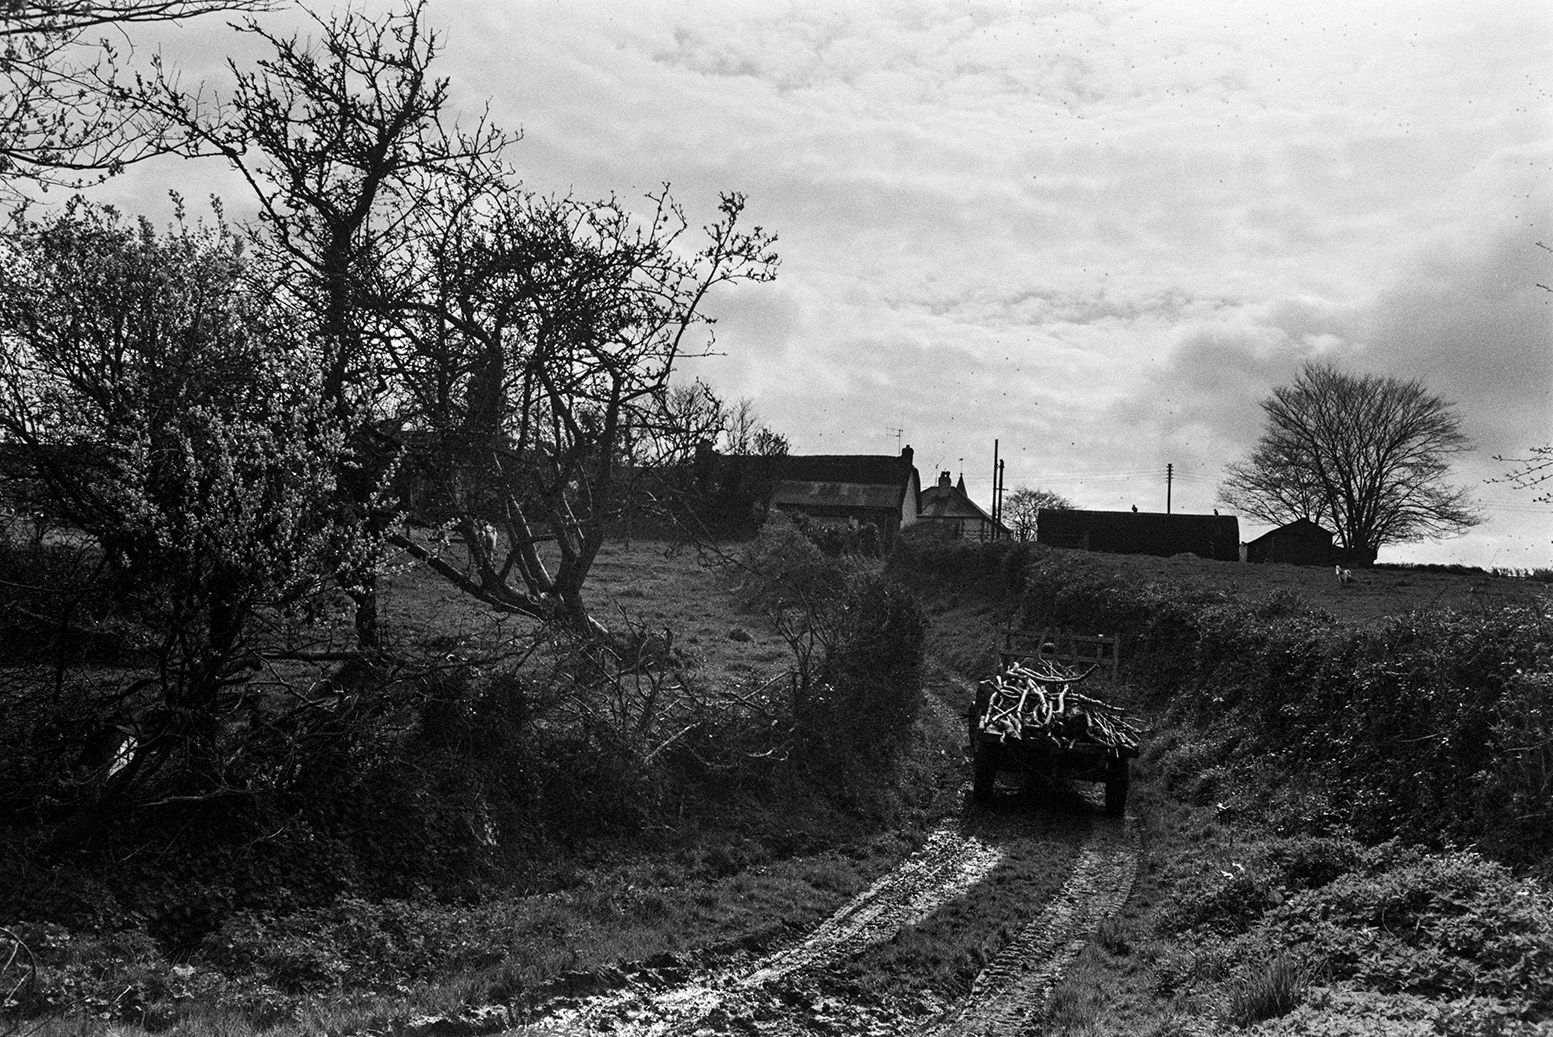 A person driving a tractor and trailer loaded with logs down a muddy lane in Beaford. Farm buildings can be seen in the background.